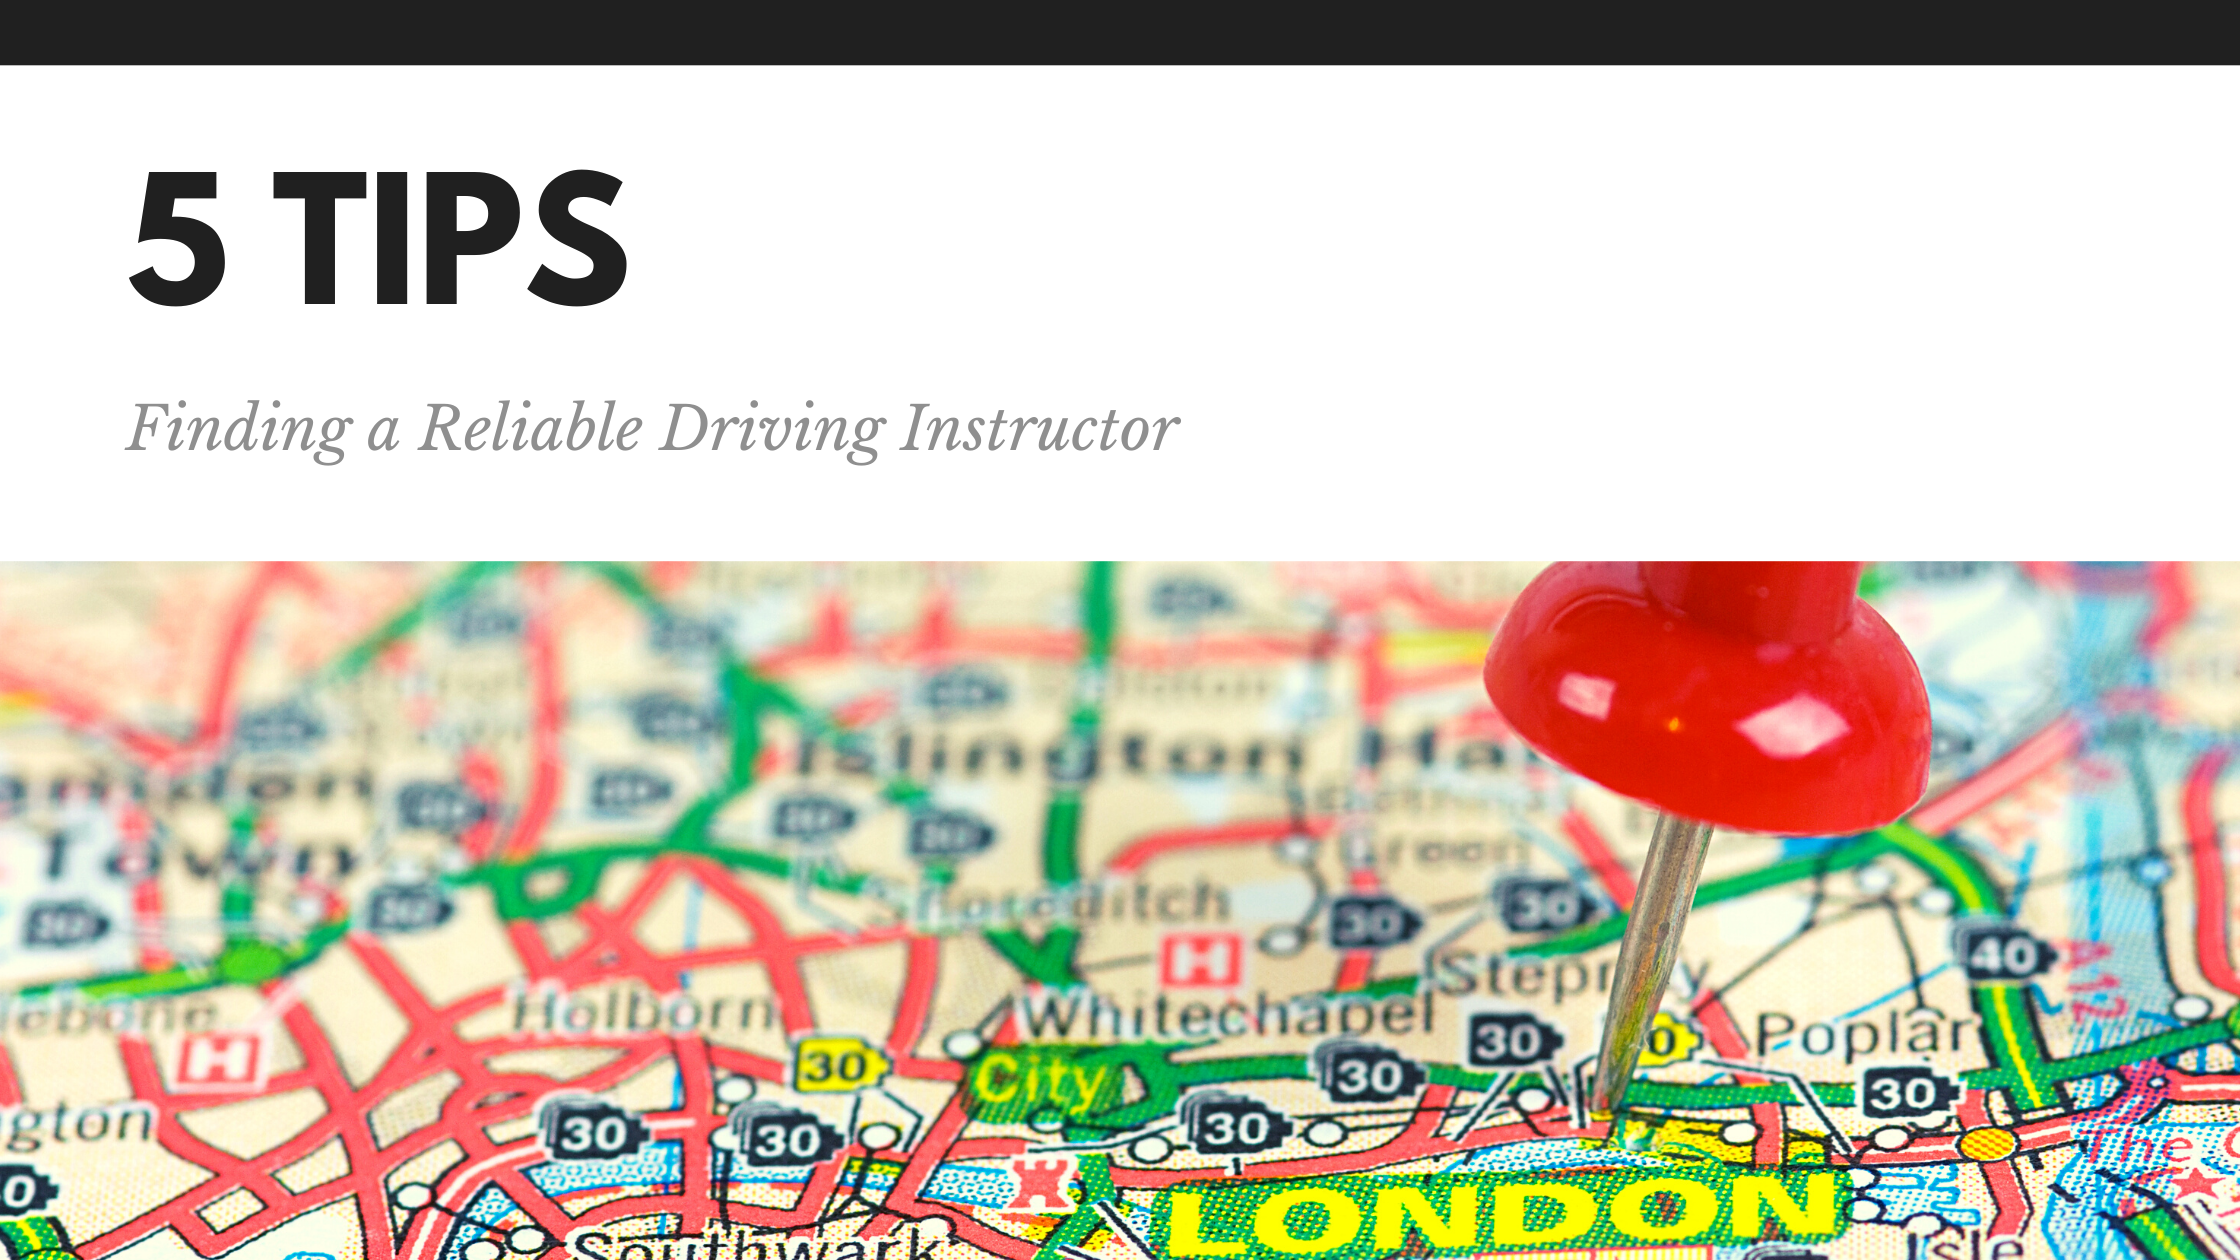 5 Tips for Finding a Reliable Driving Instructor